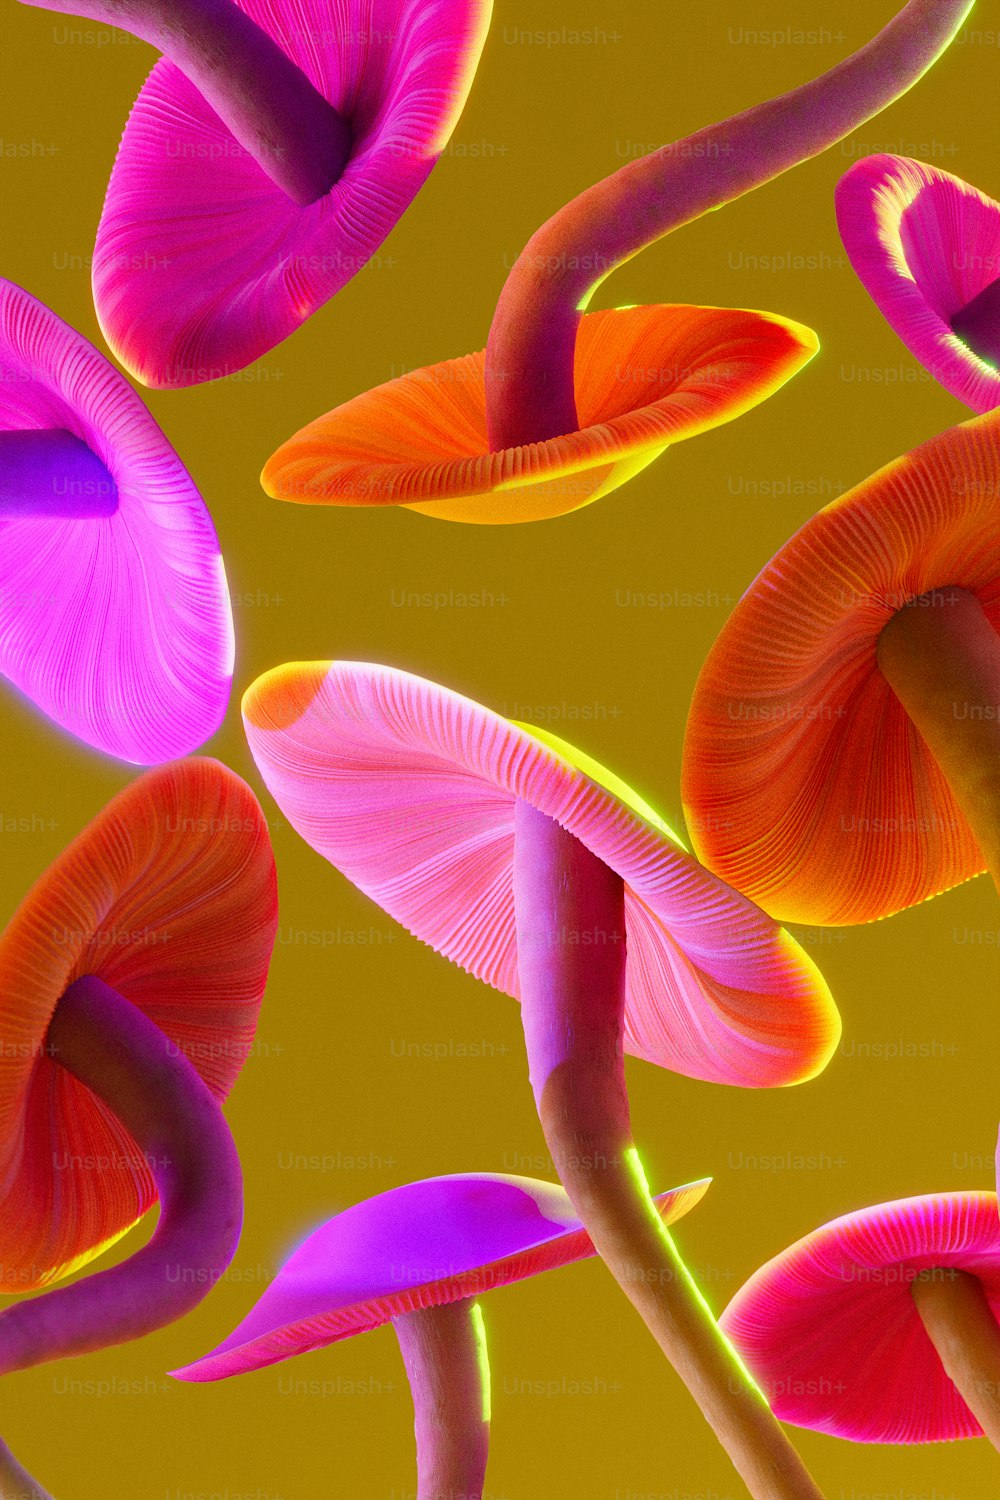 a close up of a bunch of mushrooms on a yellow background